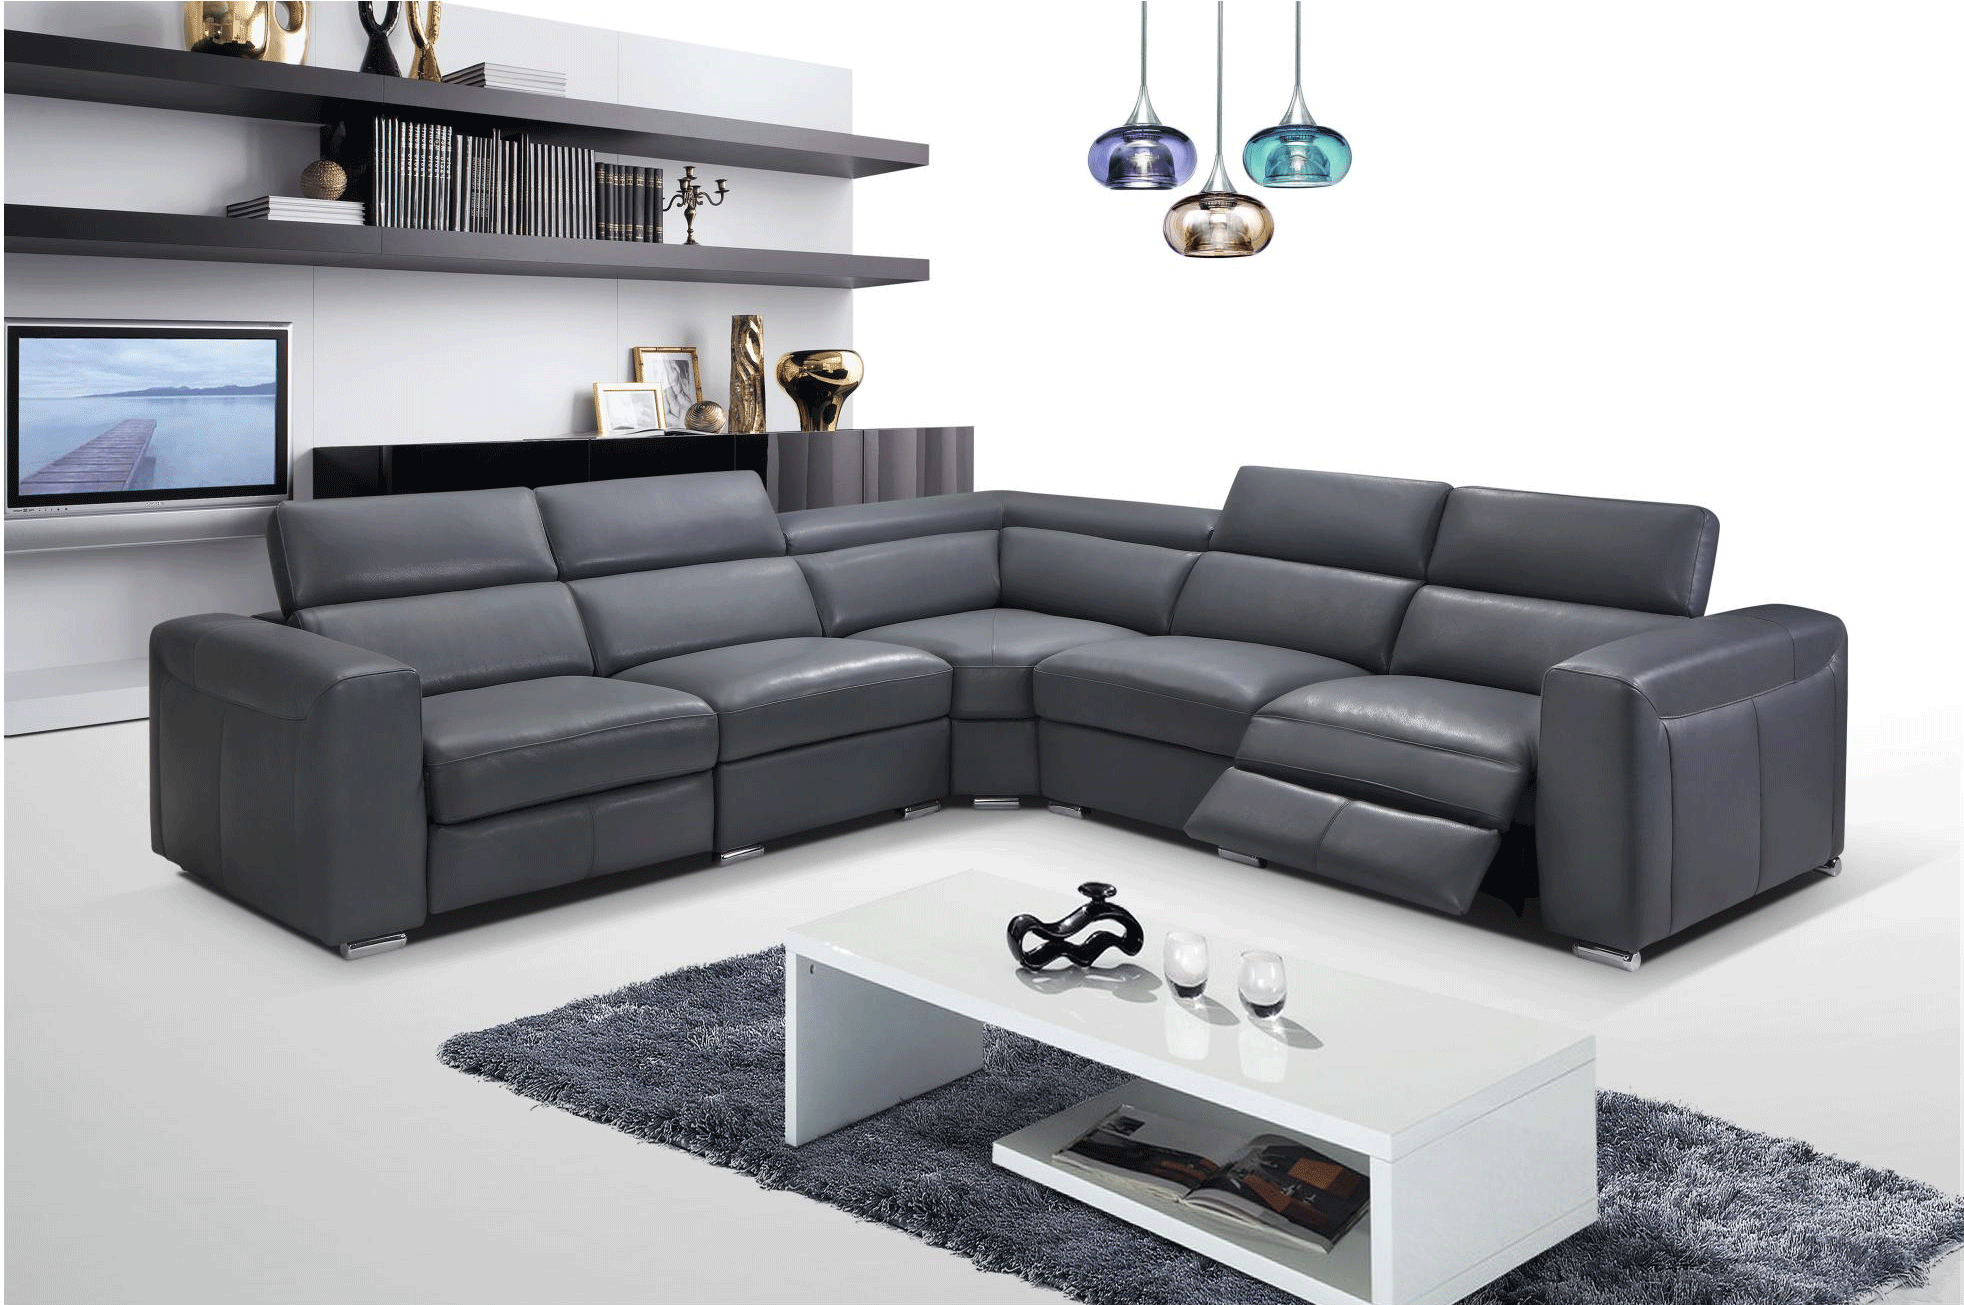 Bedroom Furniture Modern Bedrooms QS and KS 2919 Sectional w/ recliners